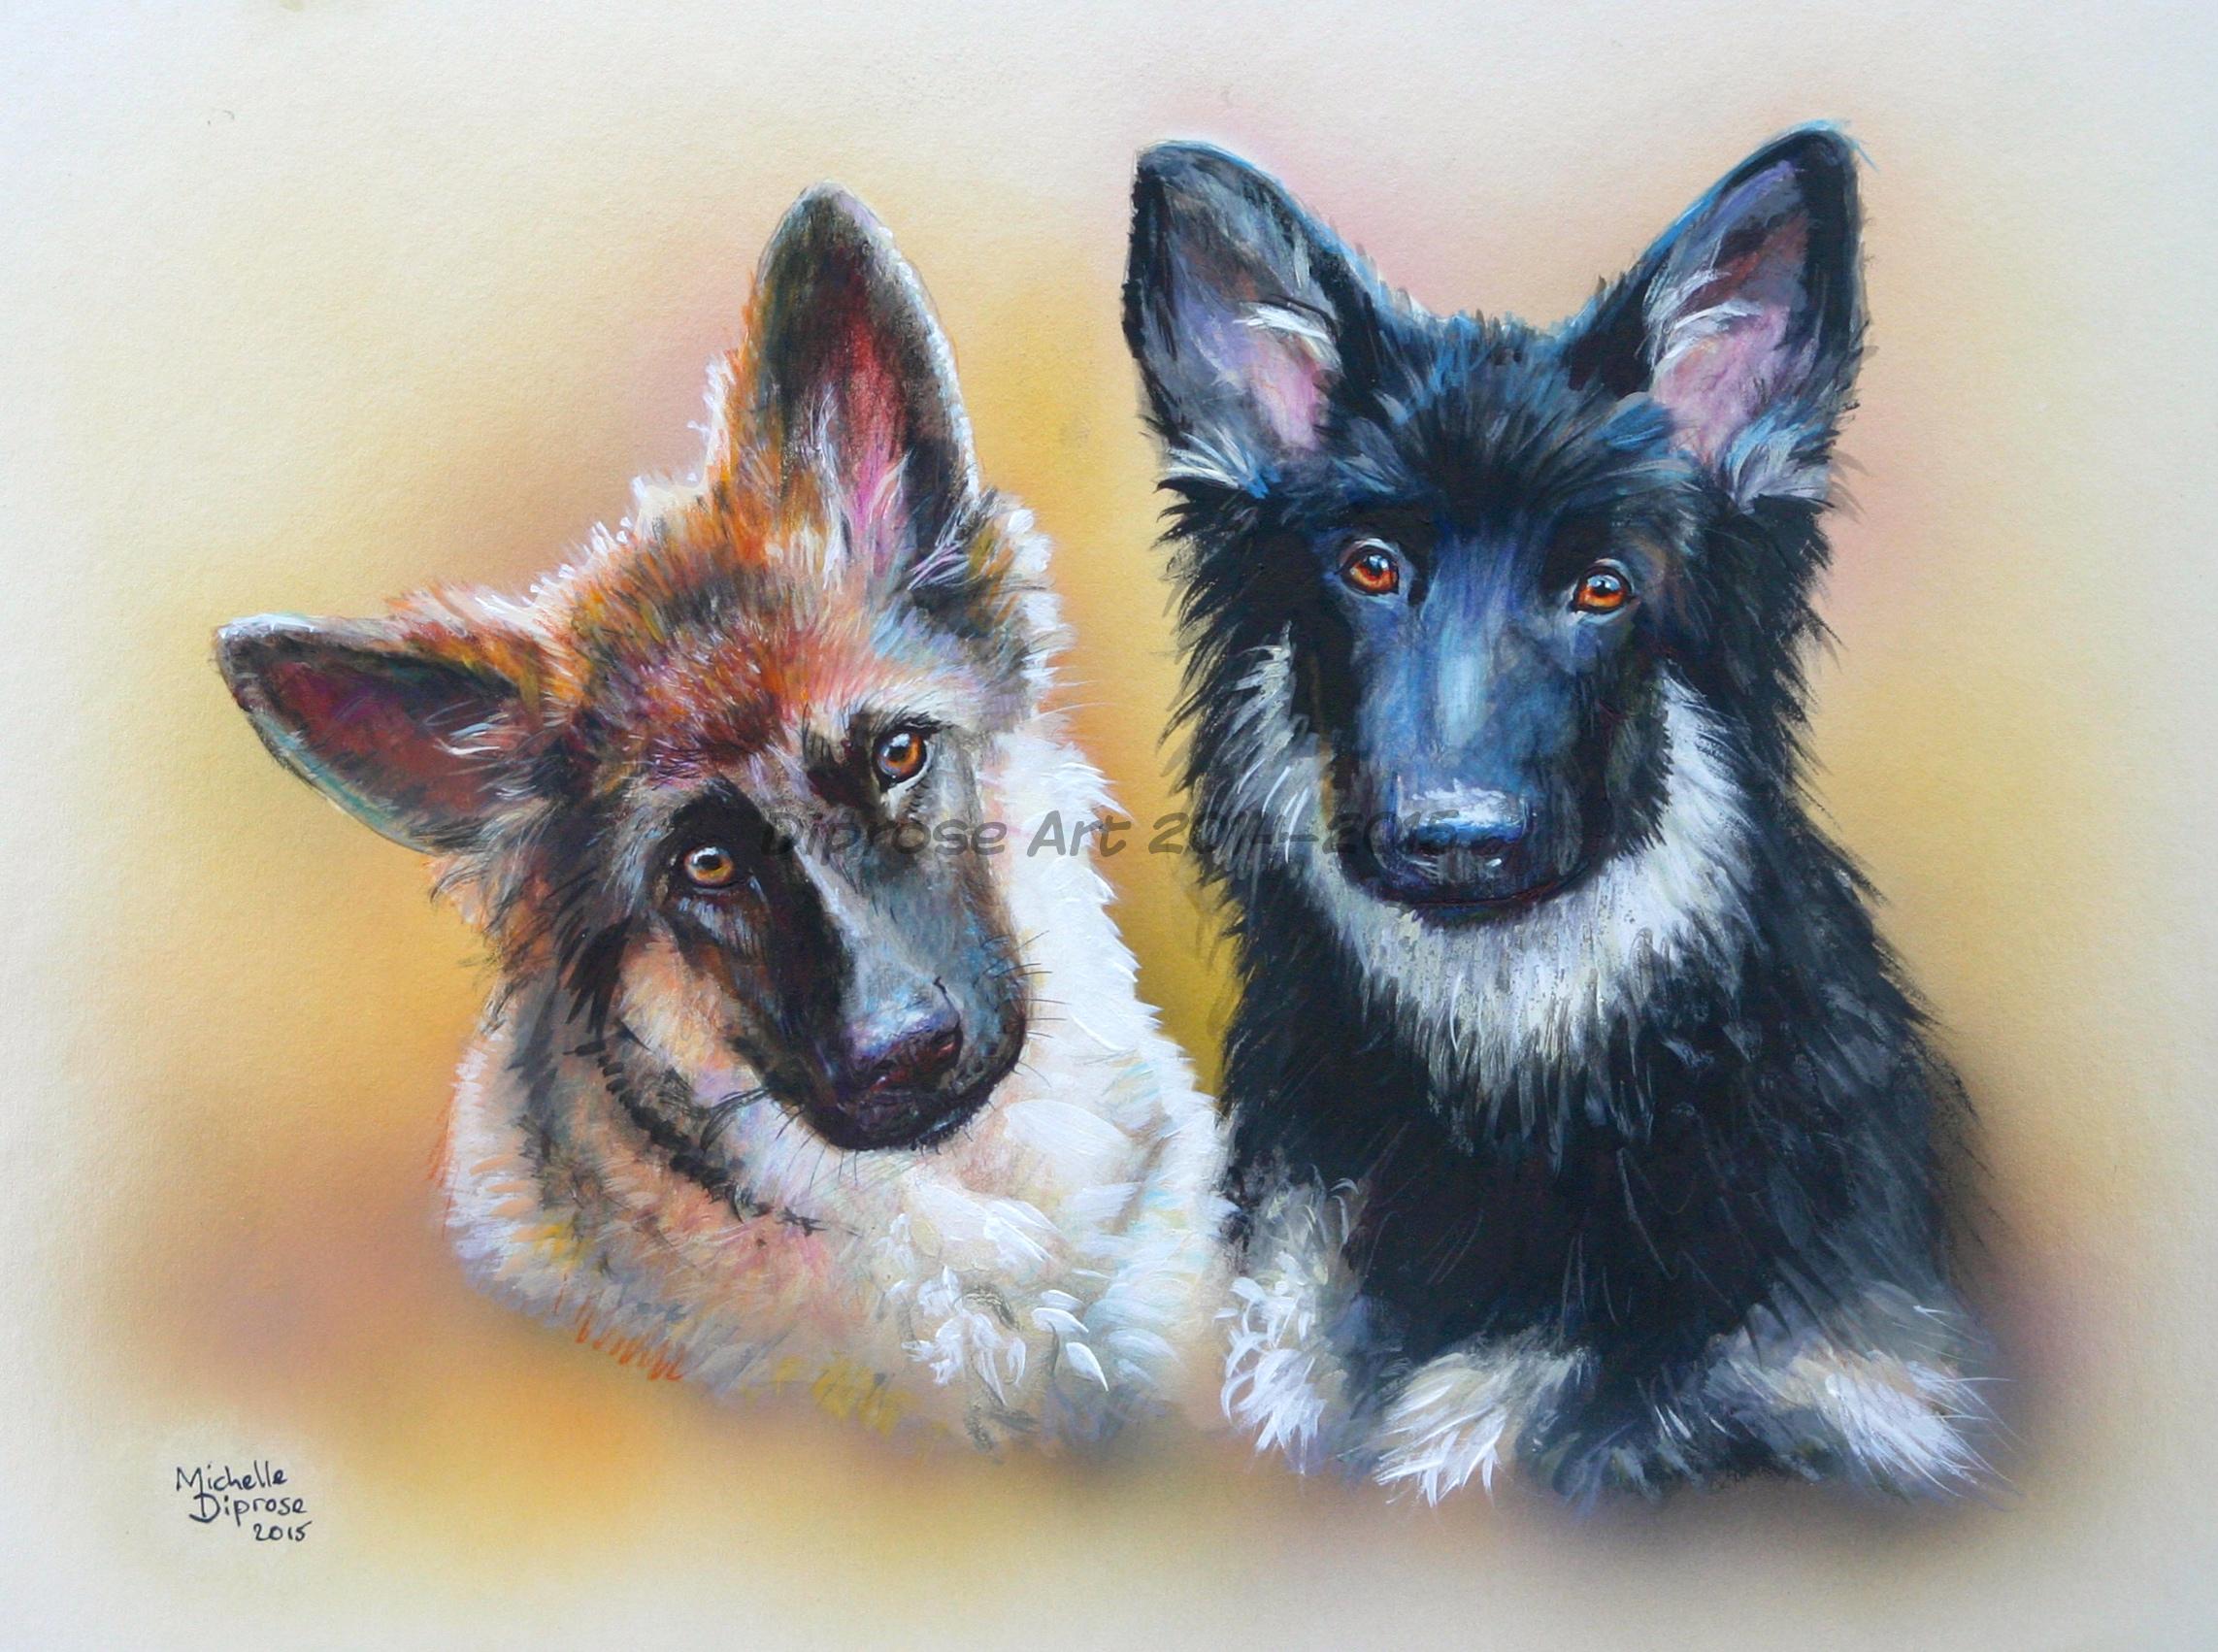 Acrylics on board - approx A3 - pet dog portrait - German Shepherd pups are super cute - lovely soft fluffy coats.  Sadly one of the boys died very young so I hope my painting dose him justice and is a nice keepsake - he won&#039;t be forgotten.